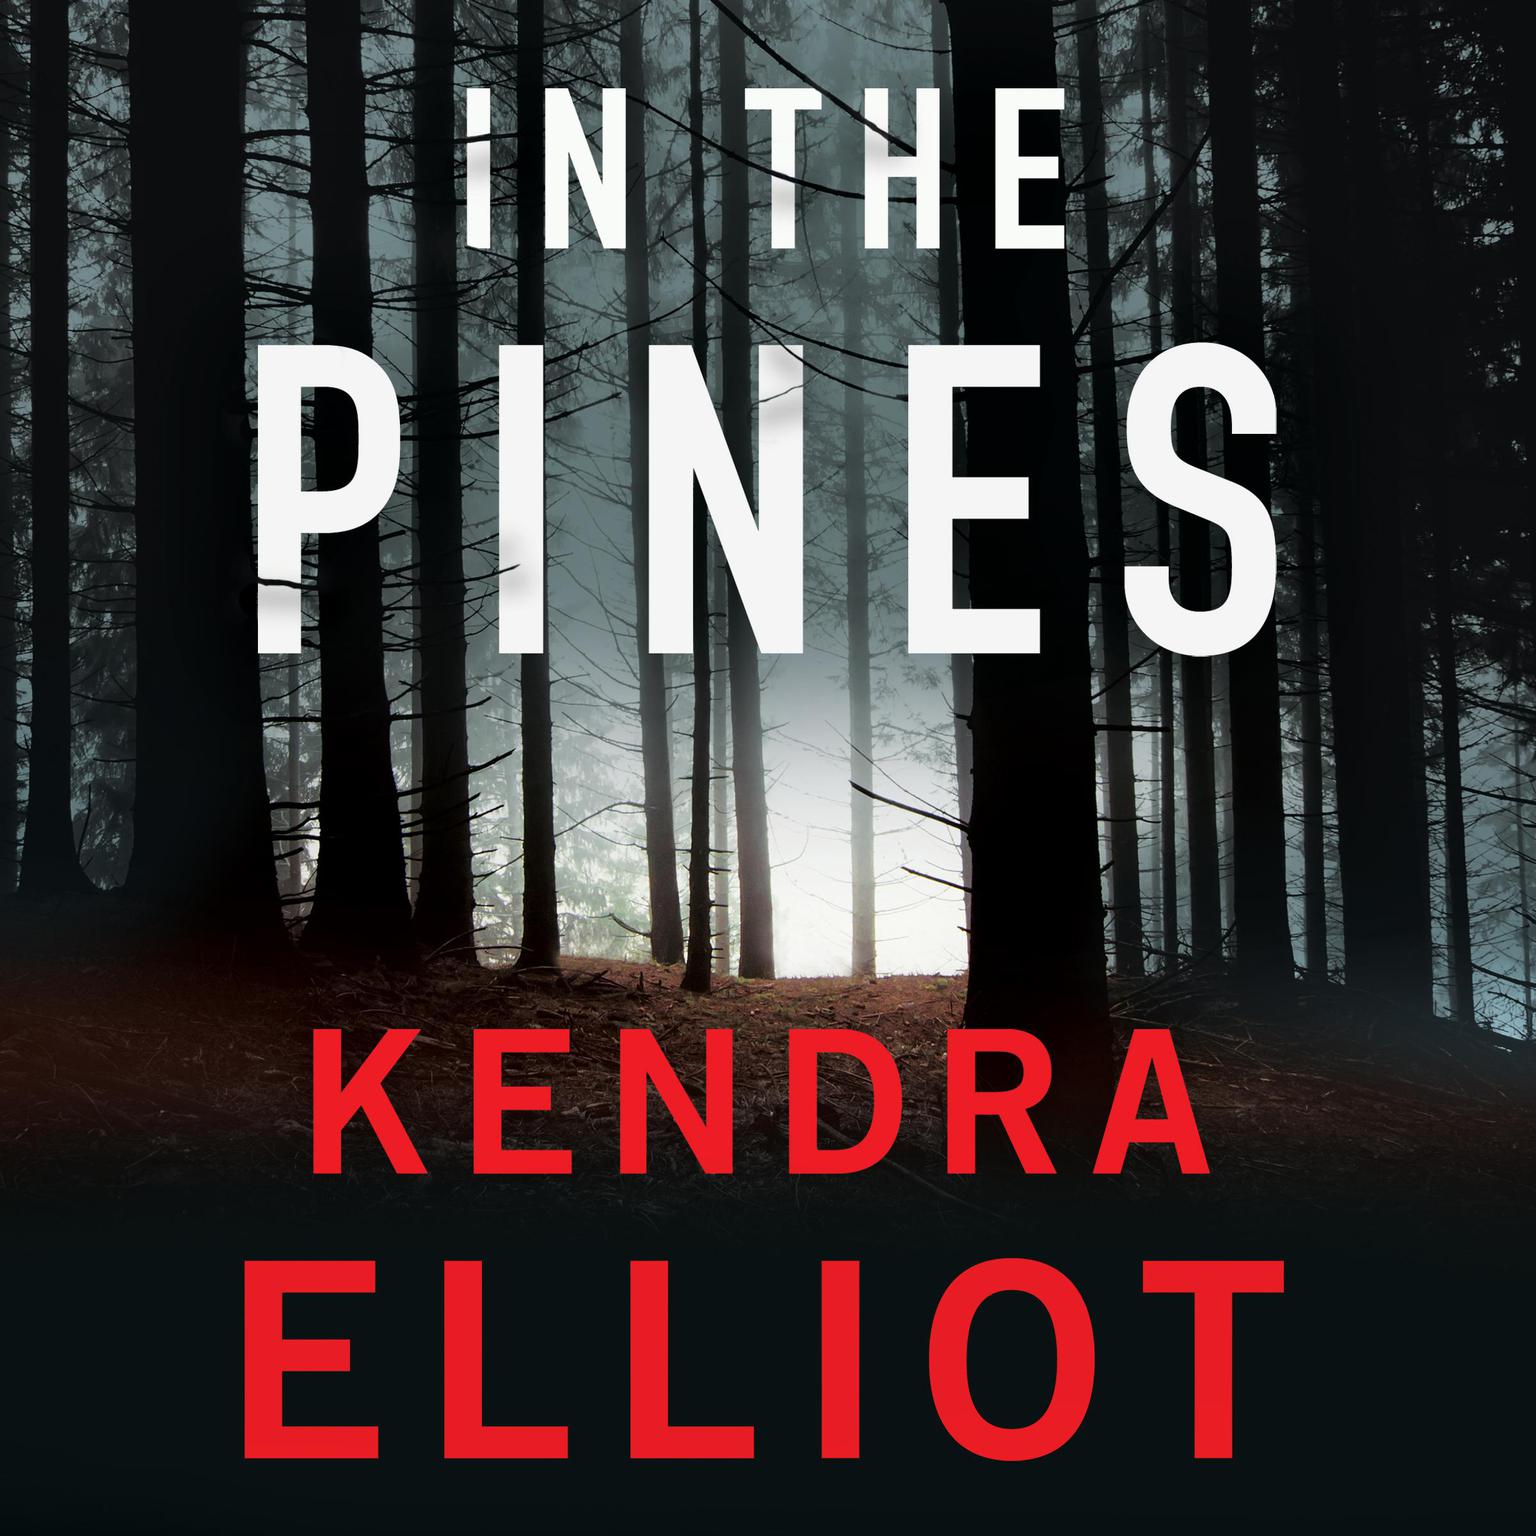 In the Pines Audiobook, by Kendra Elliot